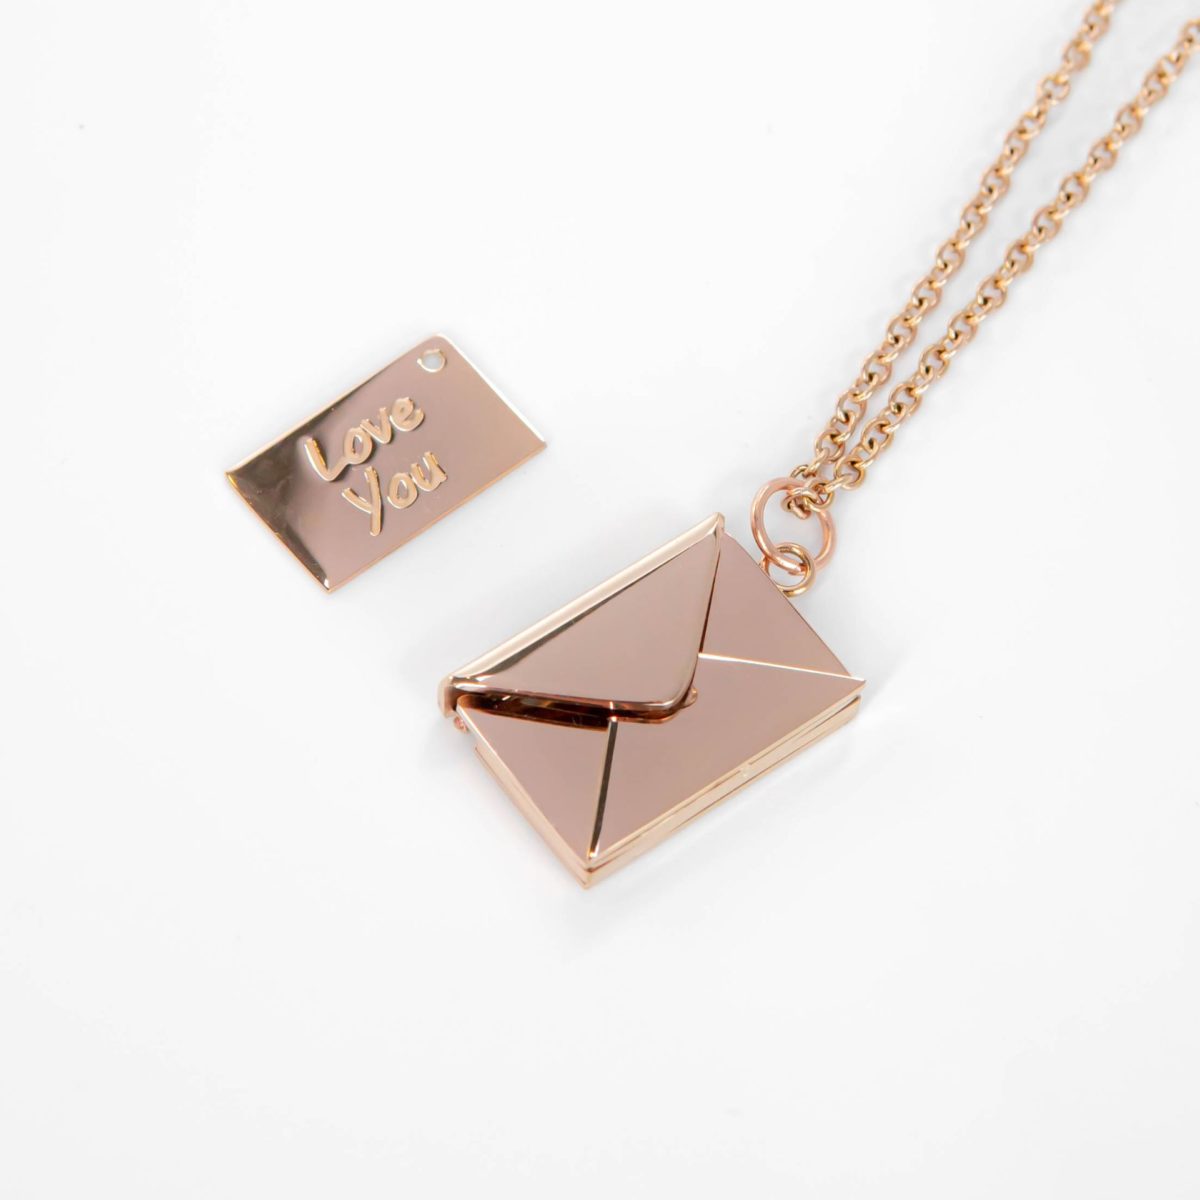 https://m.clubbella.co/product/love-letter-18k-rose-gold-plated-necklace/ Love letter necklace (2)